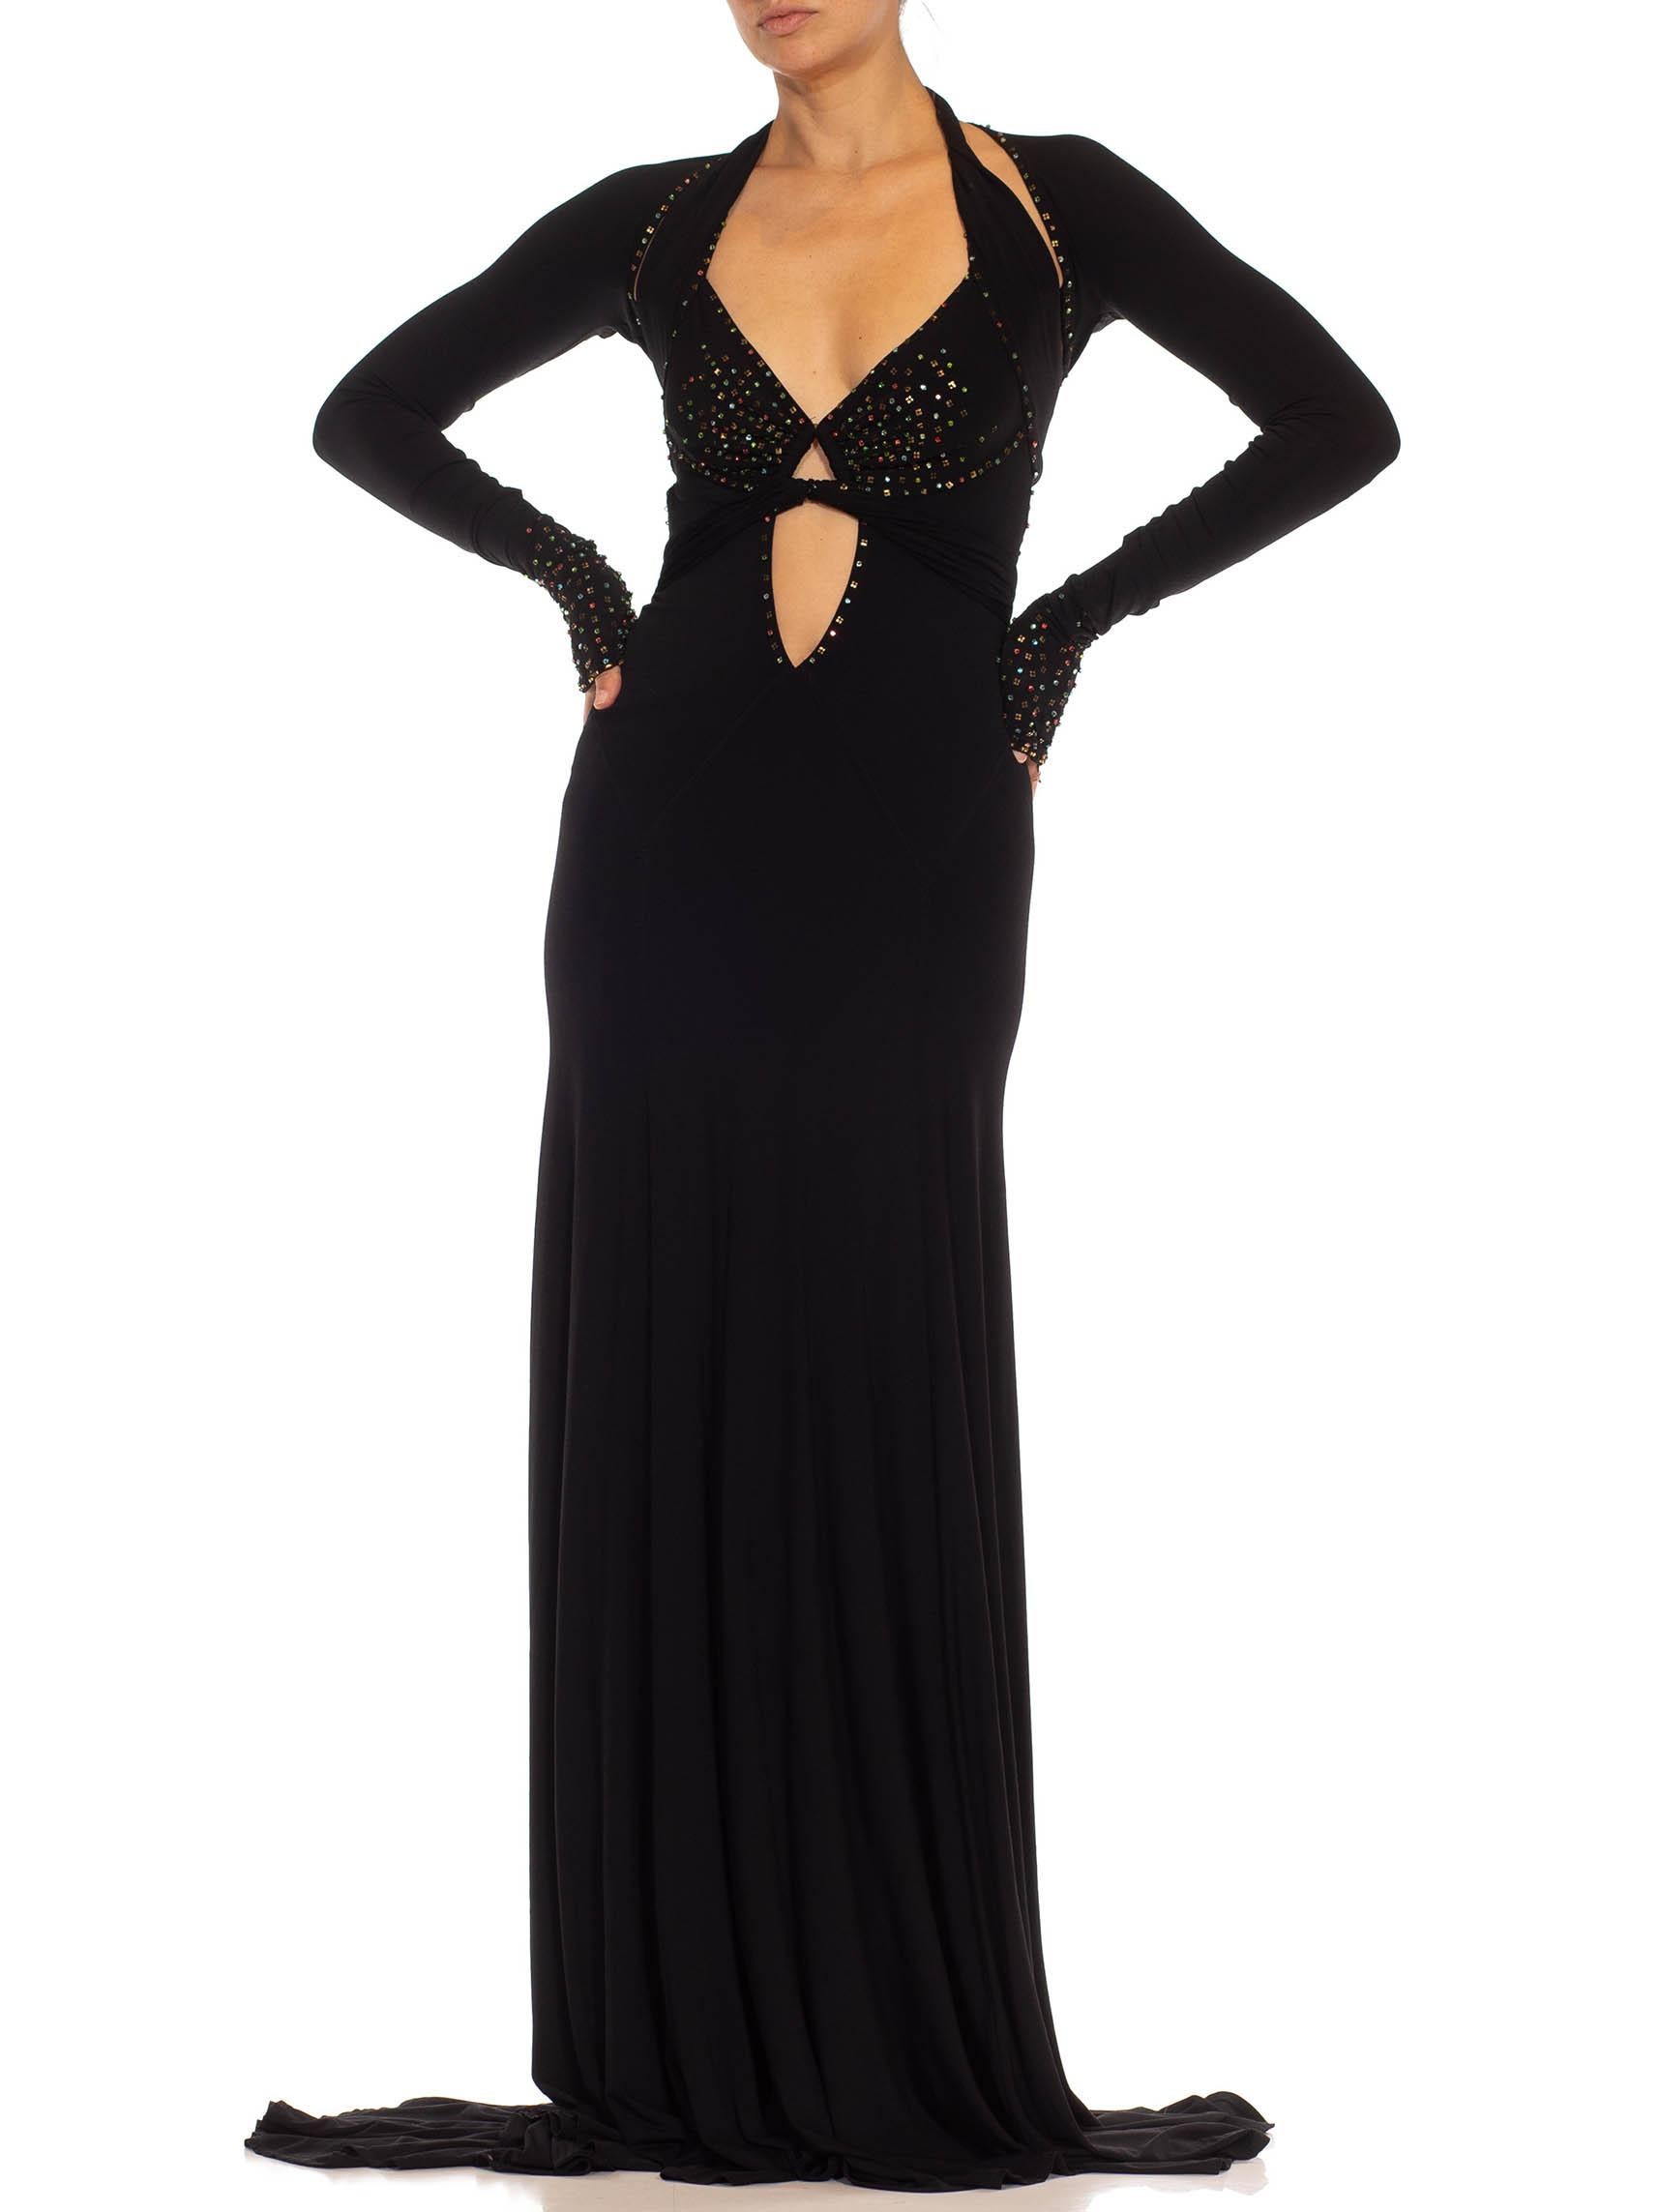 1990S Black Jersey Sexy Slinky Rhinestone Halter Neck Gown With Arm Sleeve Piece For Sale 2